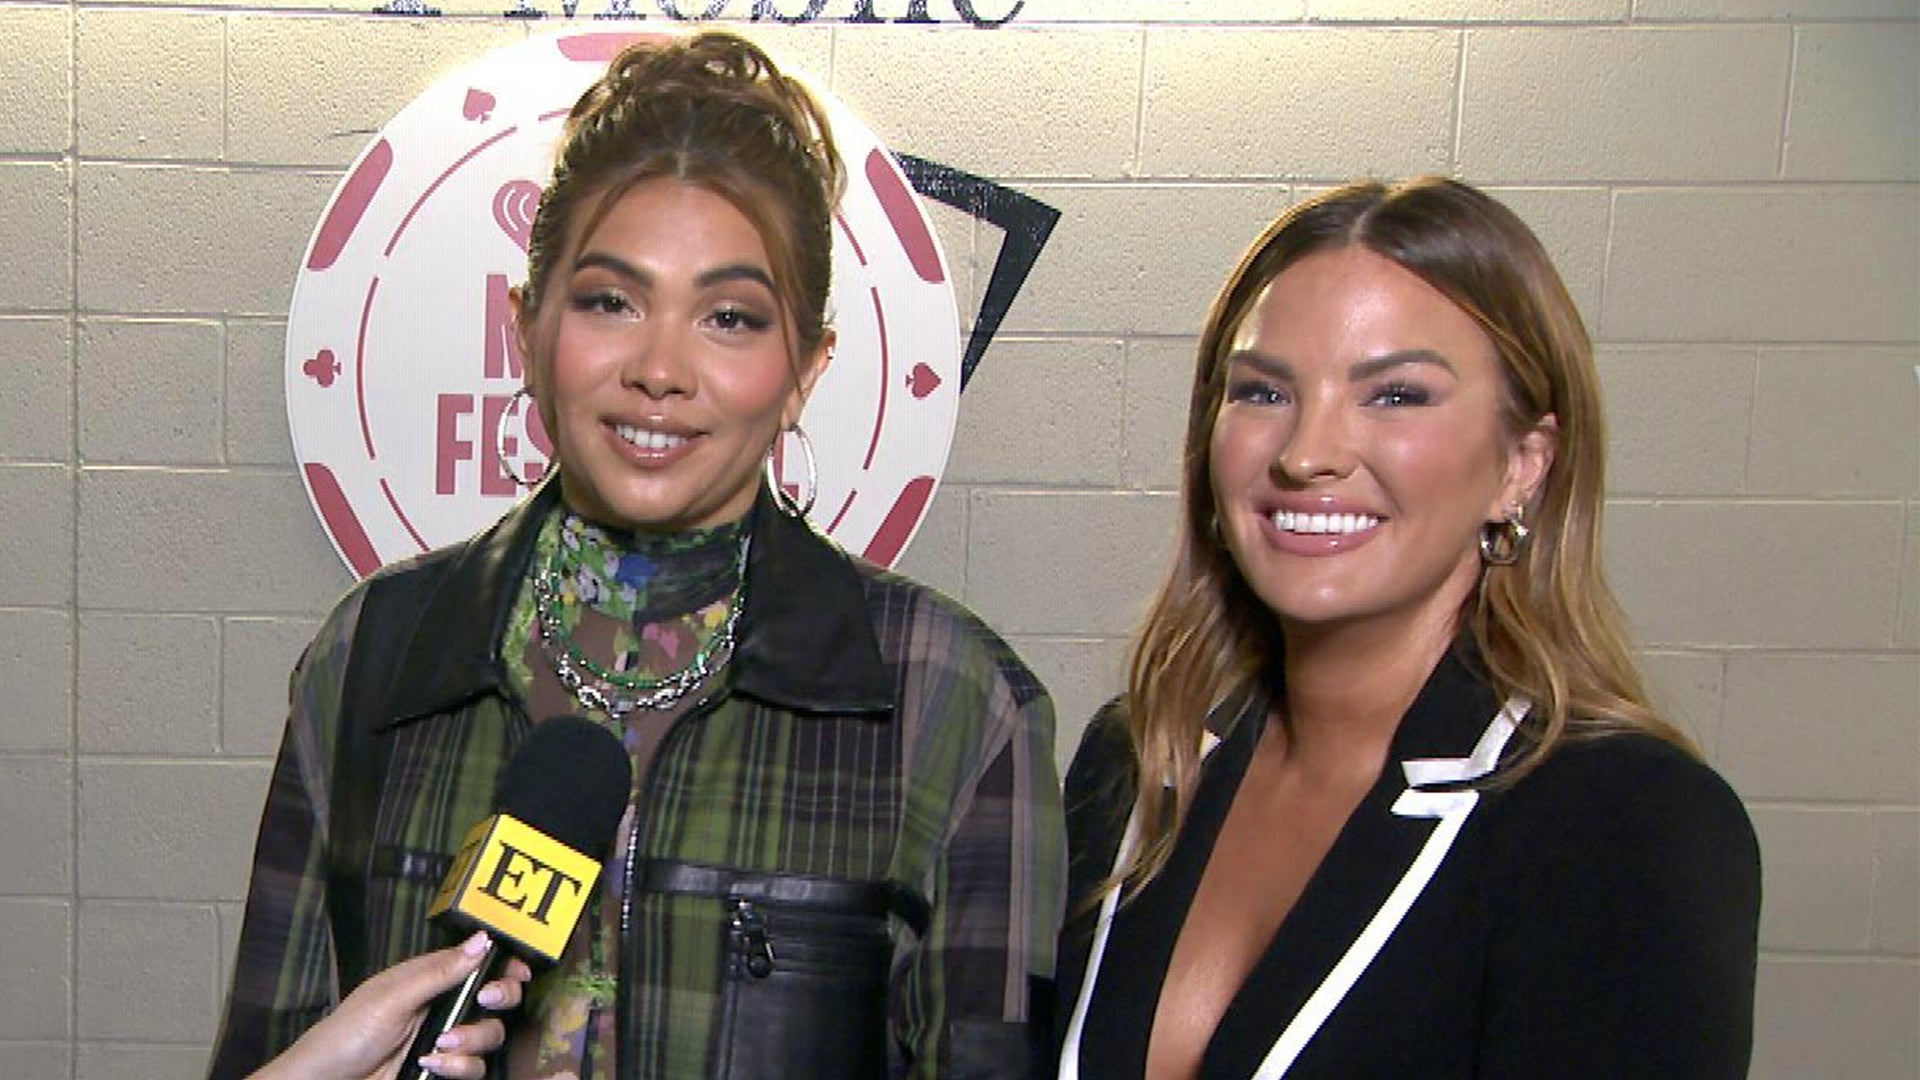 Hayley Kiyoko and Becca Tilley on Going Public With Their Relationship  After 4 Years (Exclusive)